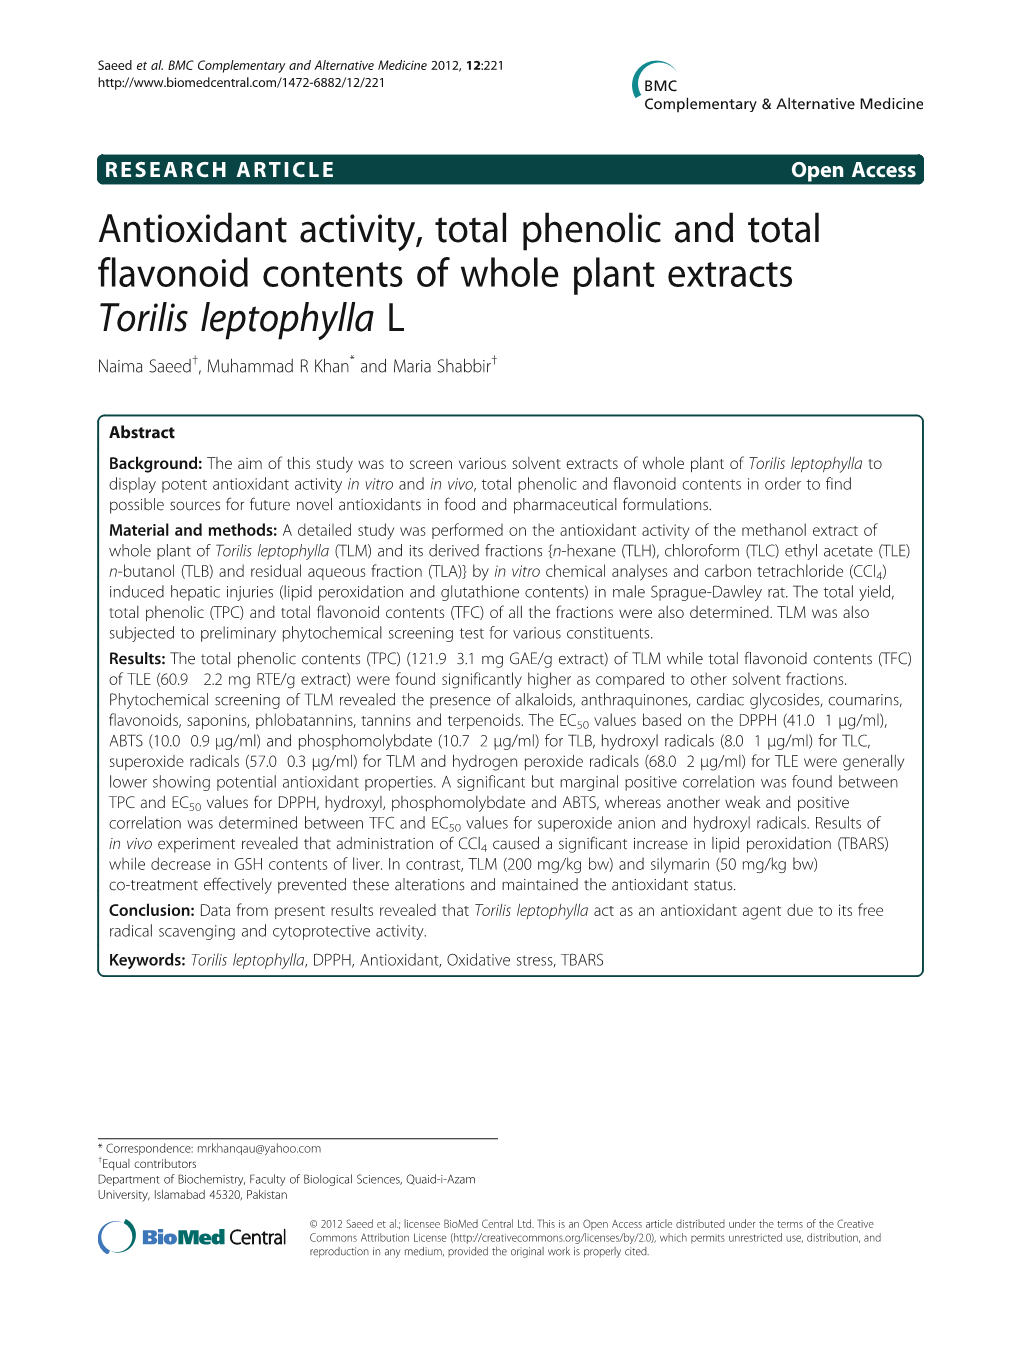 Antioxidant Activity, Total Phenolic and Total Flavonoid Contents of Whole Plant Extracts Torilis Leptophylla L Naima Saeed†, Muhammad R Khan* and Maria Shabbir†